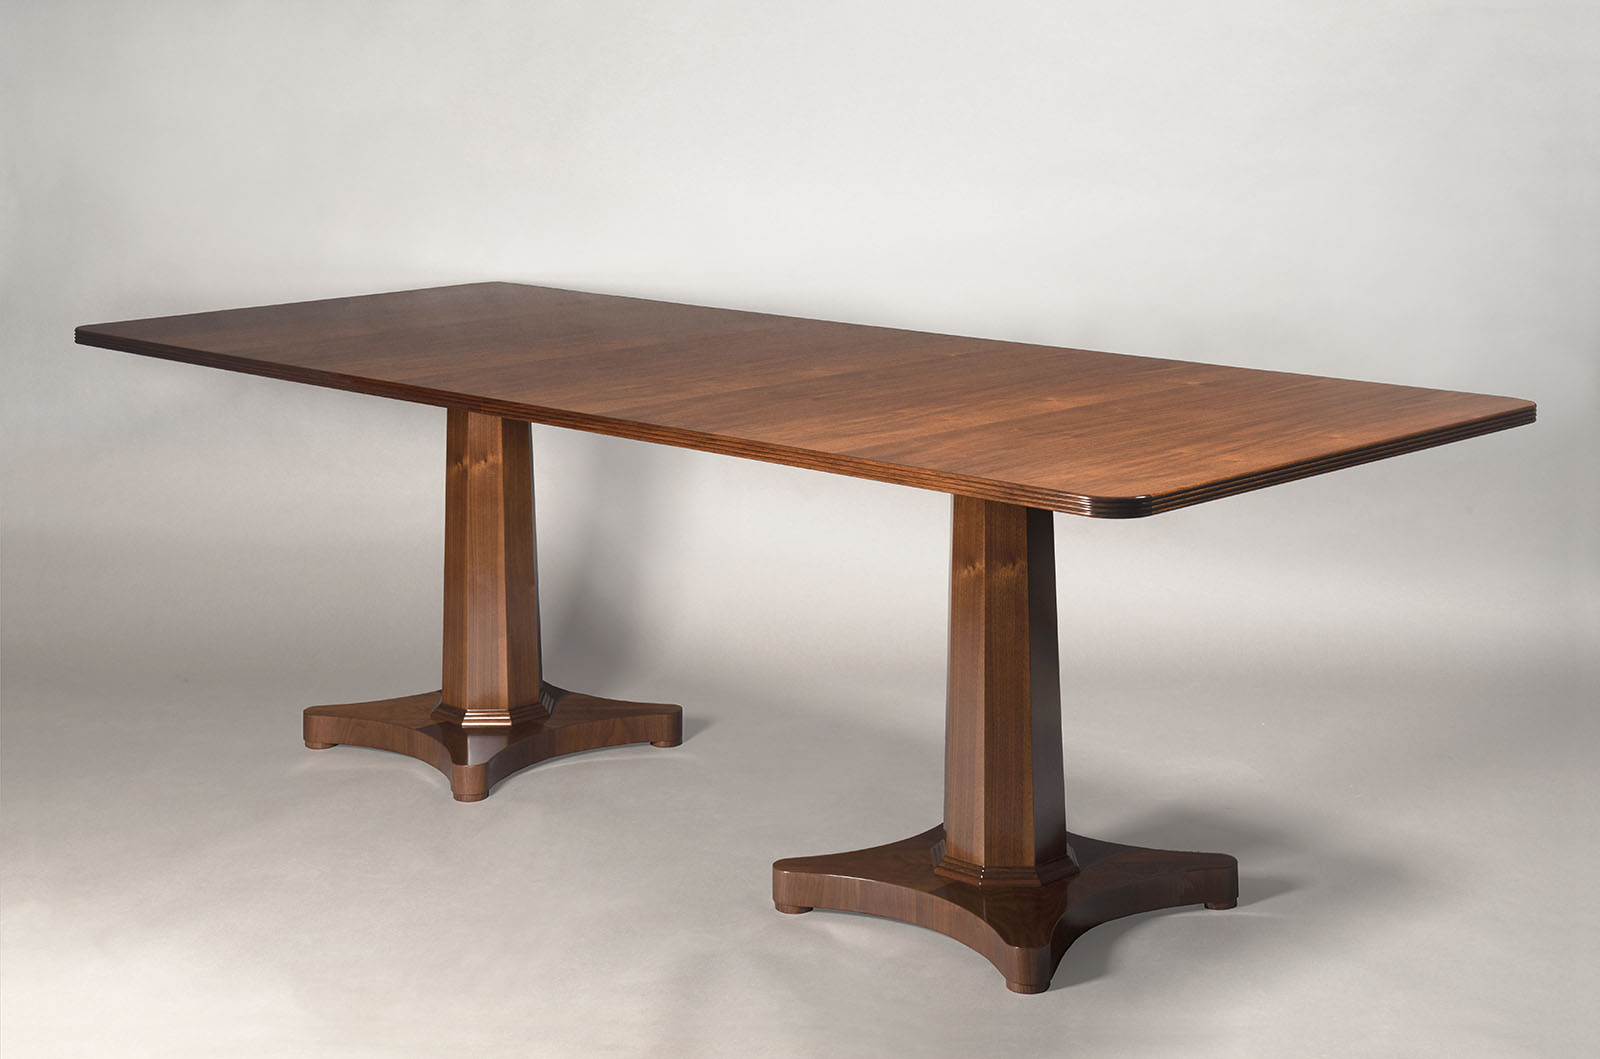 A Regency Style Dining Table by ILIAD Design